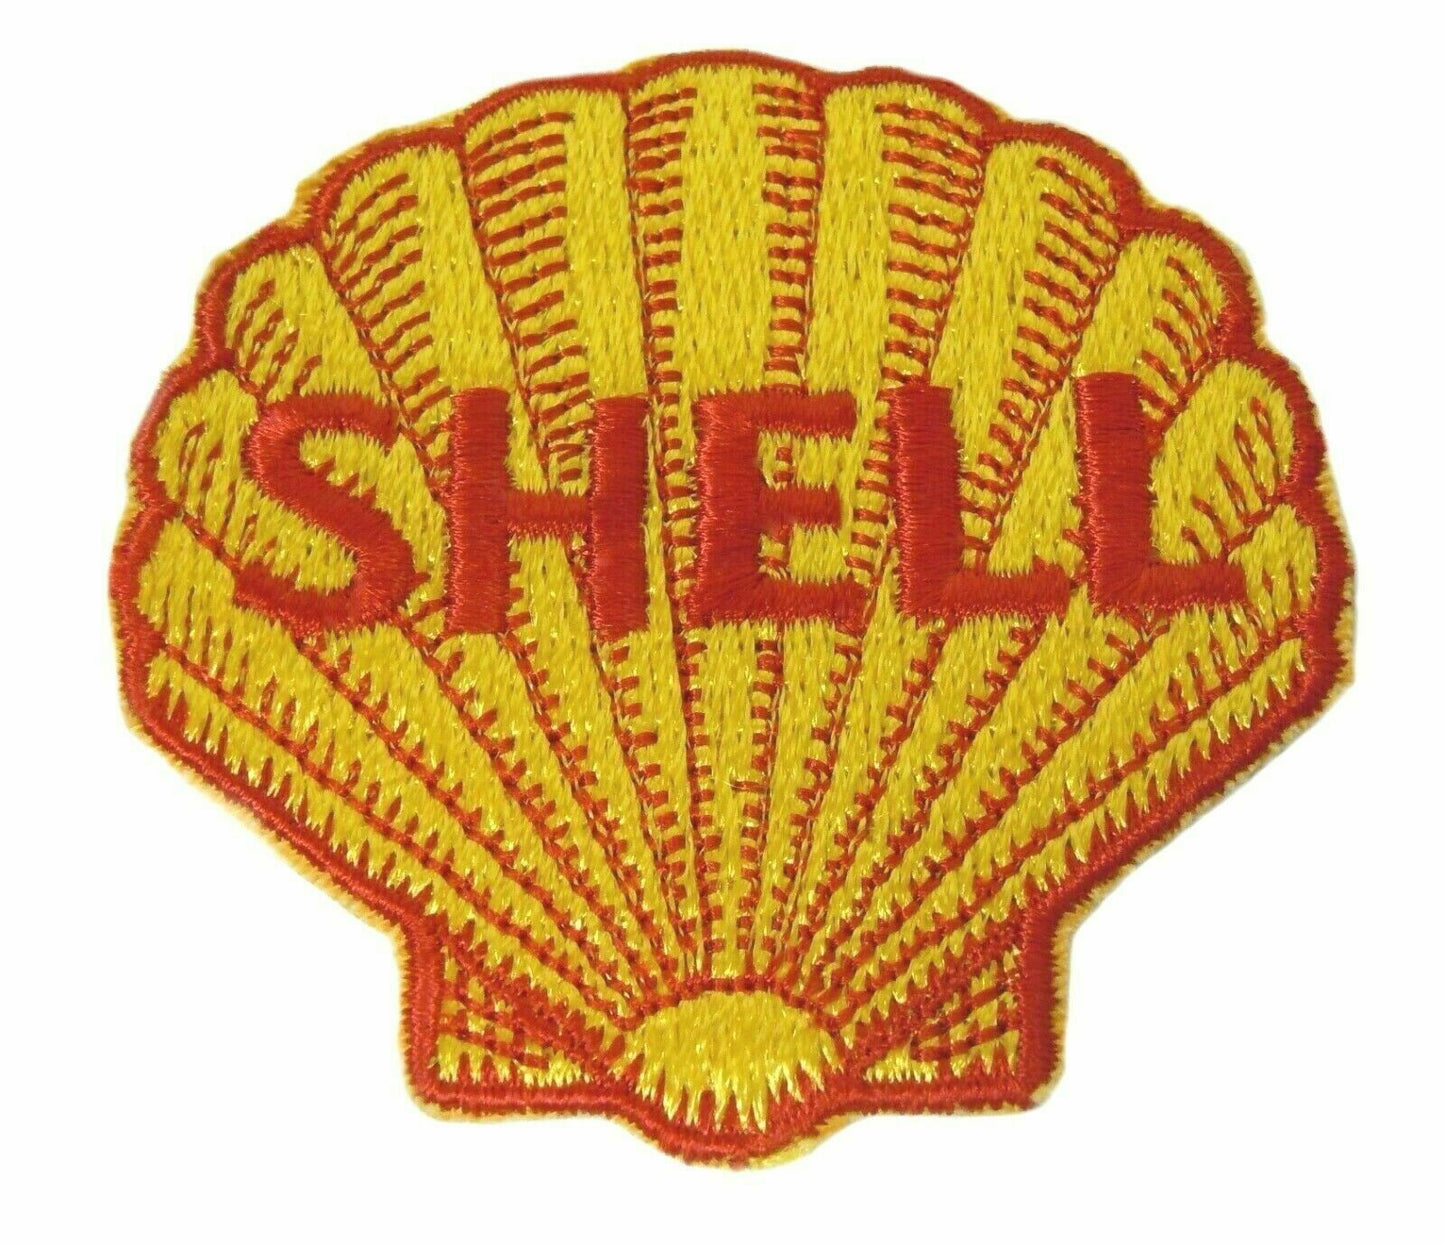 SHELL OIL Patch (3 Inch) Iron-on Badge Motor Racing Jacket Patches F1 MotoGP